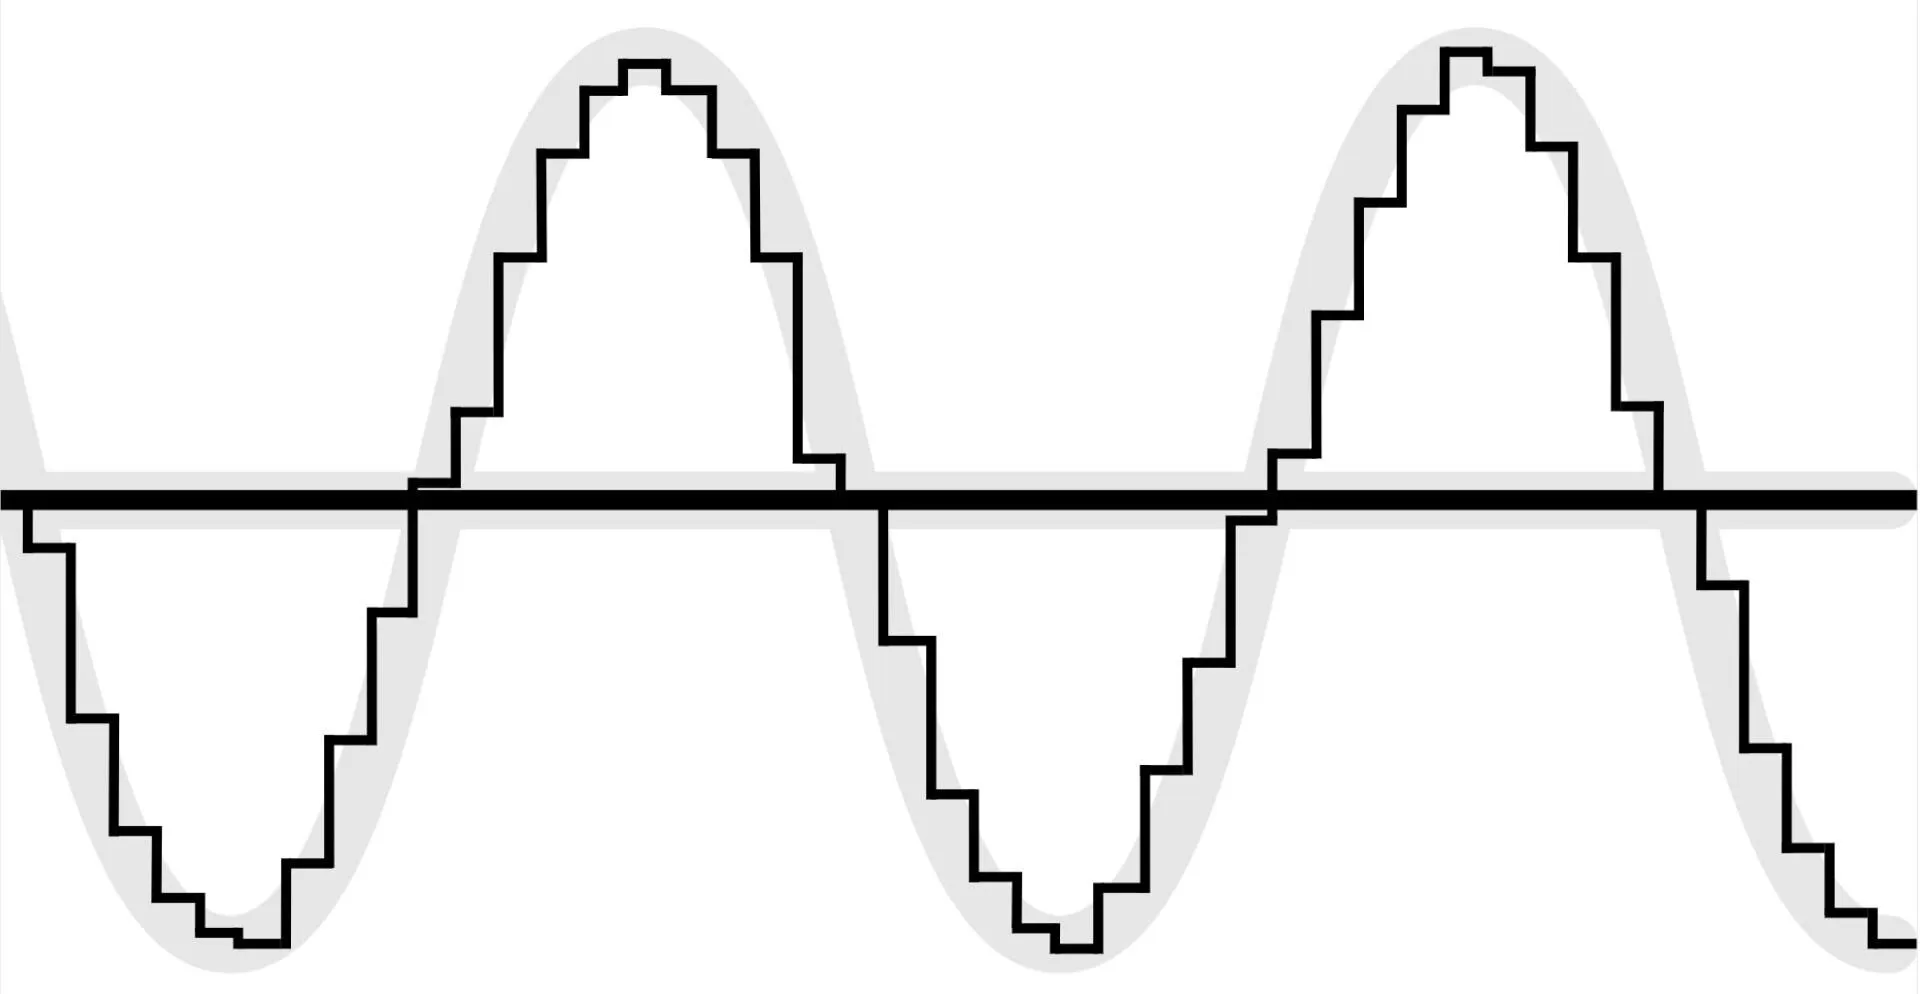 An image showing how a sound wave is converted from analog to digital via a recording interface.